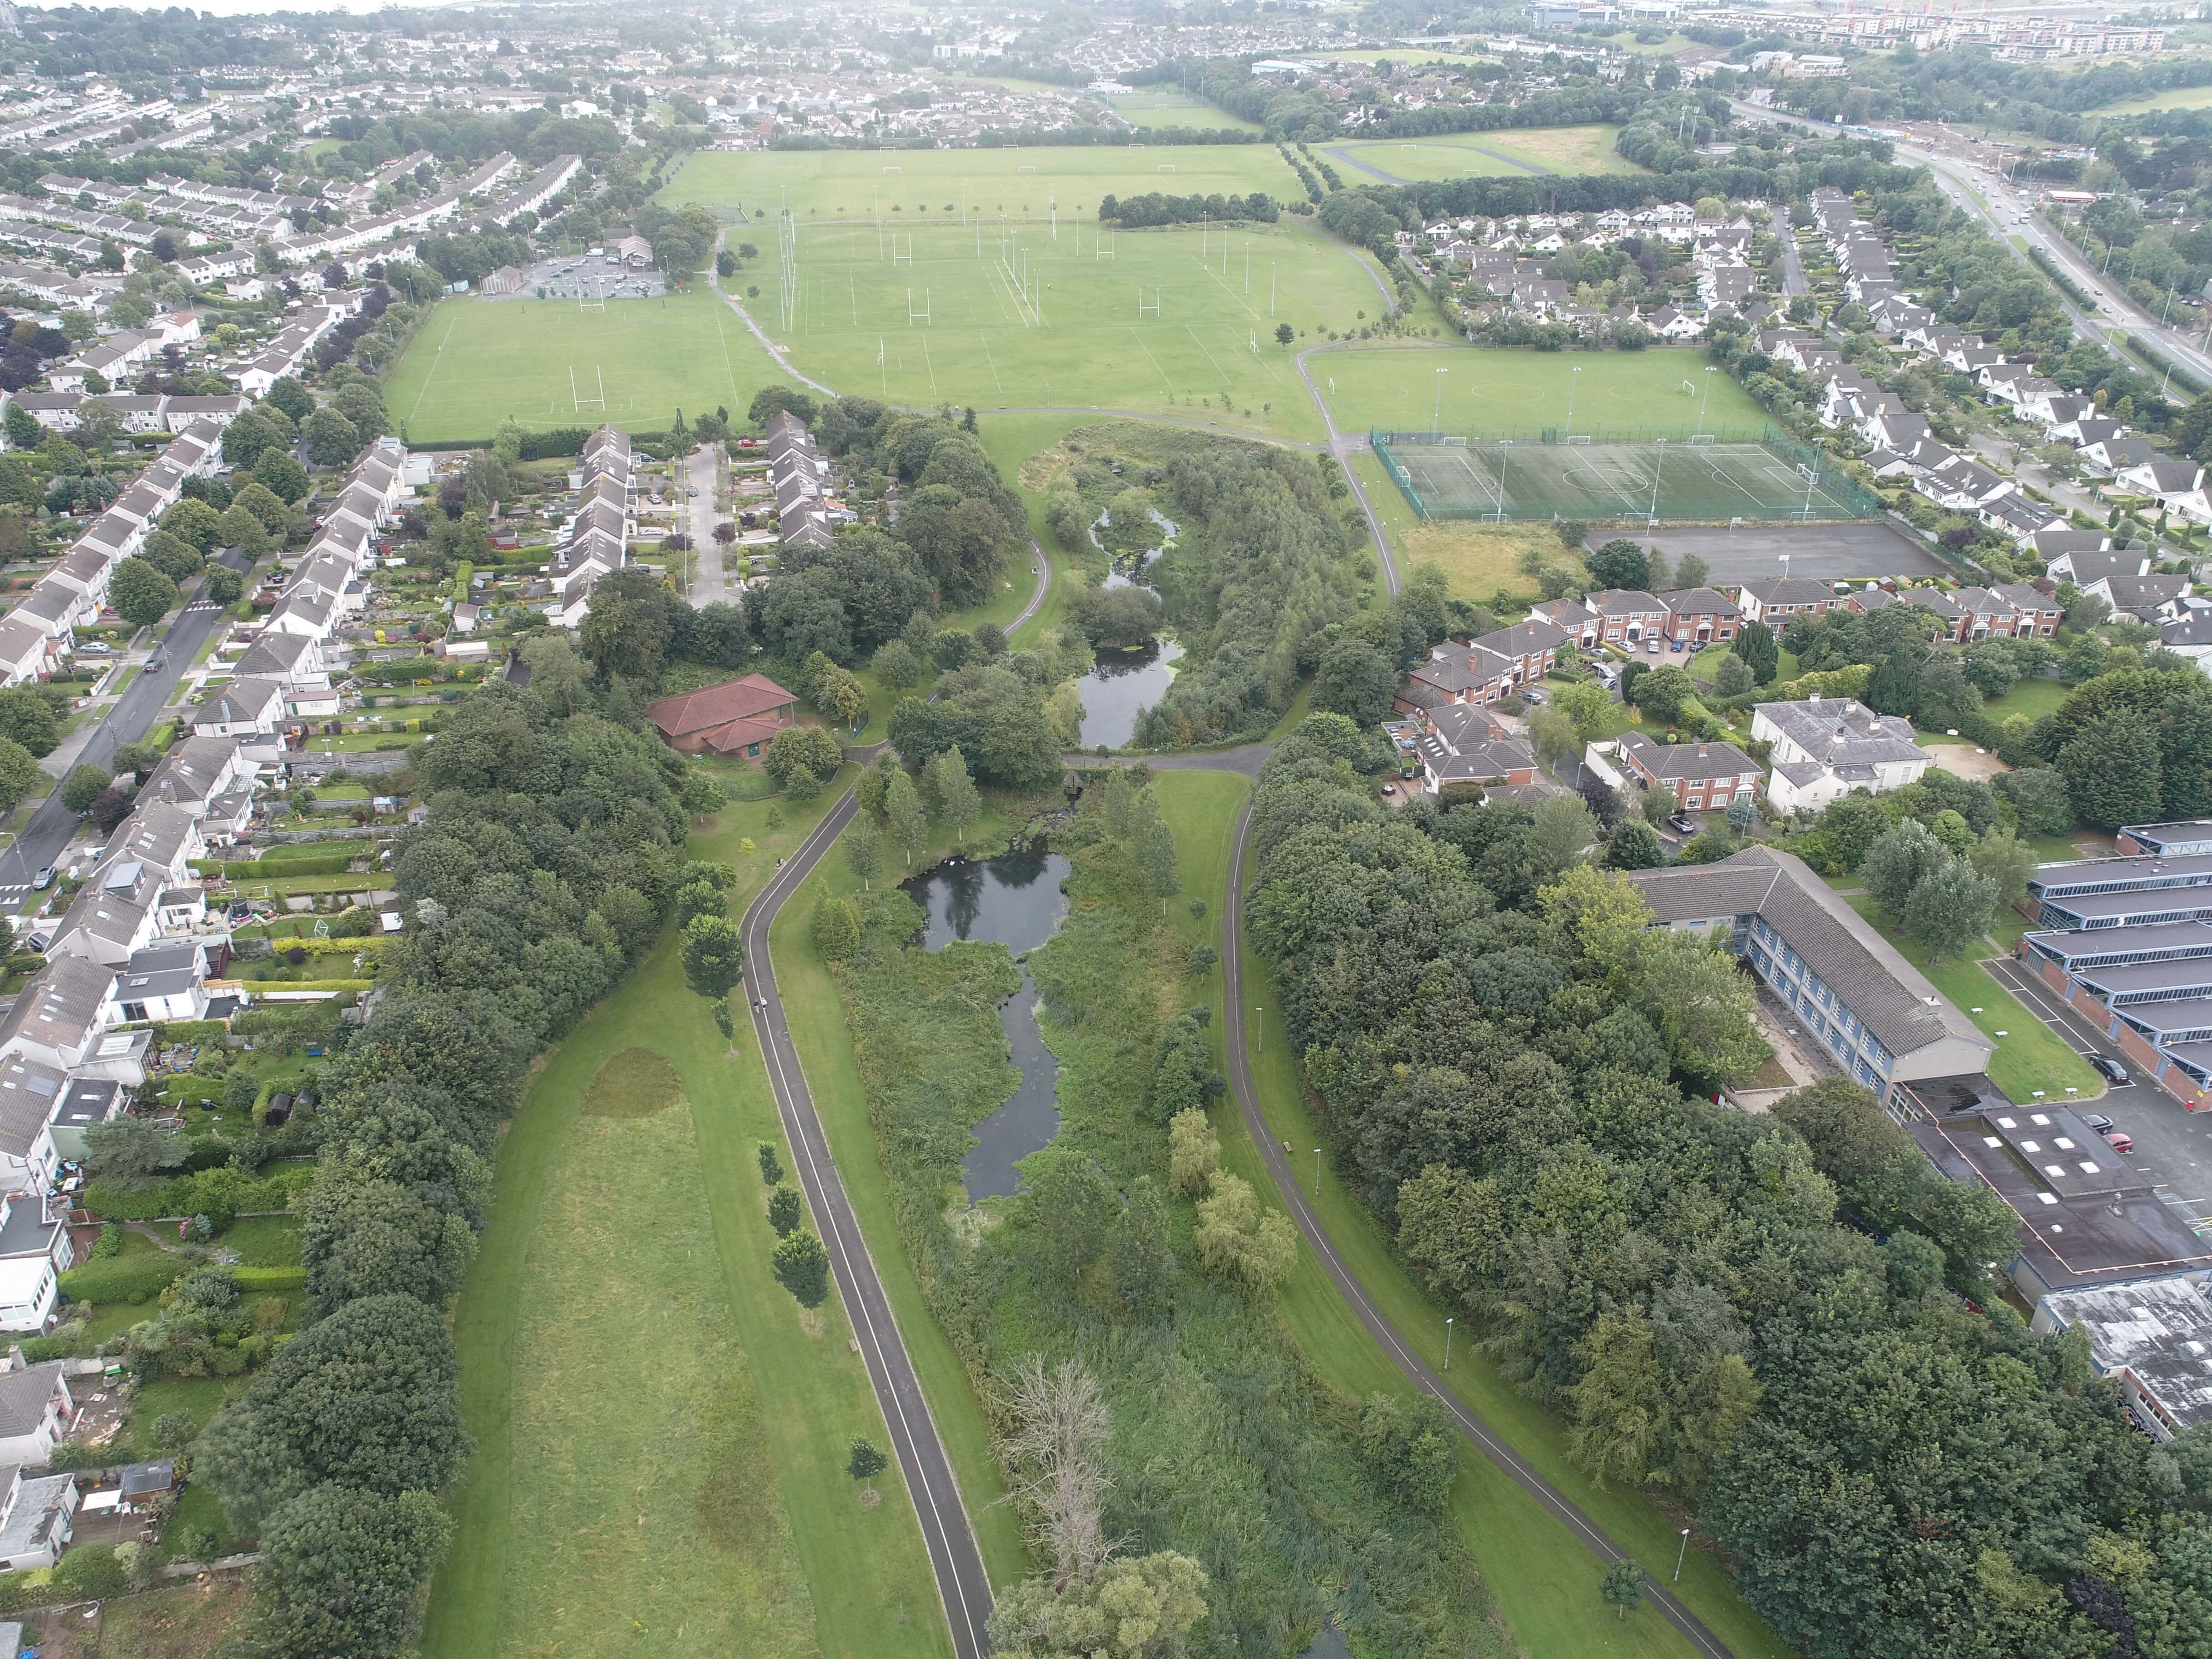 Image 7: aerial view of Kilbogget Park